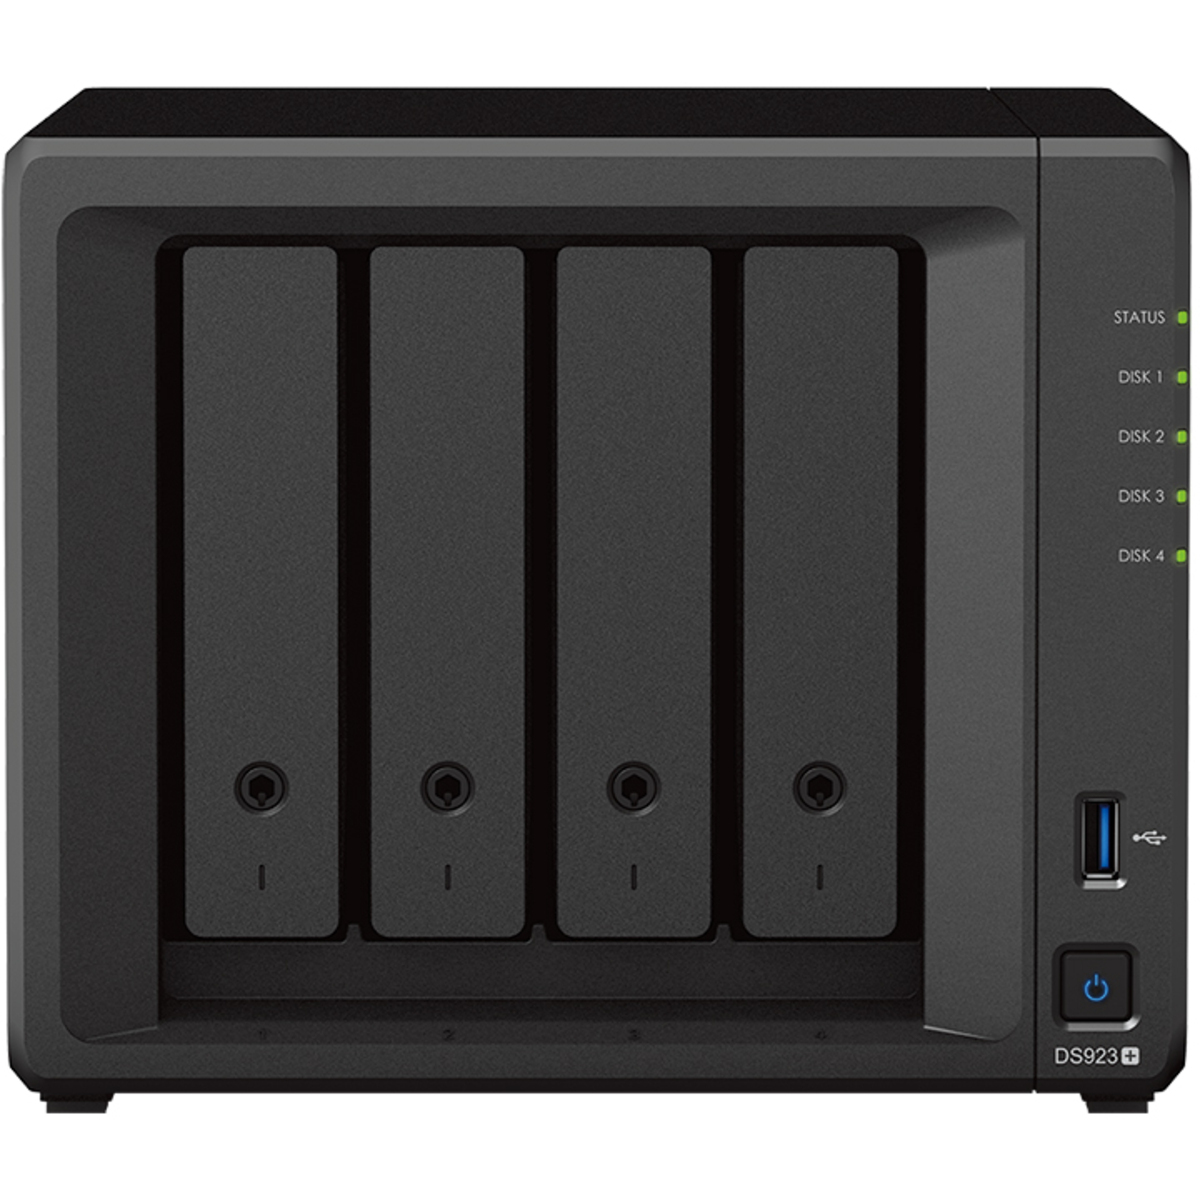 buy Synology DiskStation DS923+ 72tb Desktop NAS - Network Attached Storage Device 4x18000gb Seagate IronWolf Pro ST18000NT001 3.5 7200rpm SATA 6Gb/s HDD NAS Class Drives Installed - Burn-In Tested - FREE RAM UPGRADE - nas headquarters buy network attached storage server device das new raid-5 free shipping simply usa christmas holiday black friday cyber monday week sale happening now! DiskStation DS923+